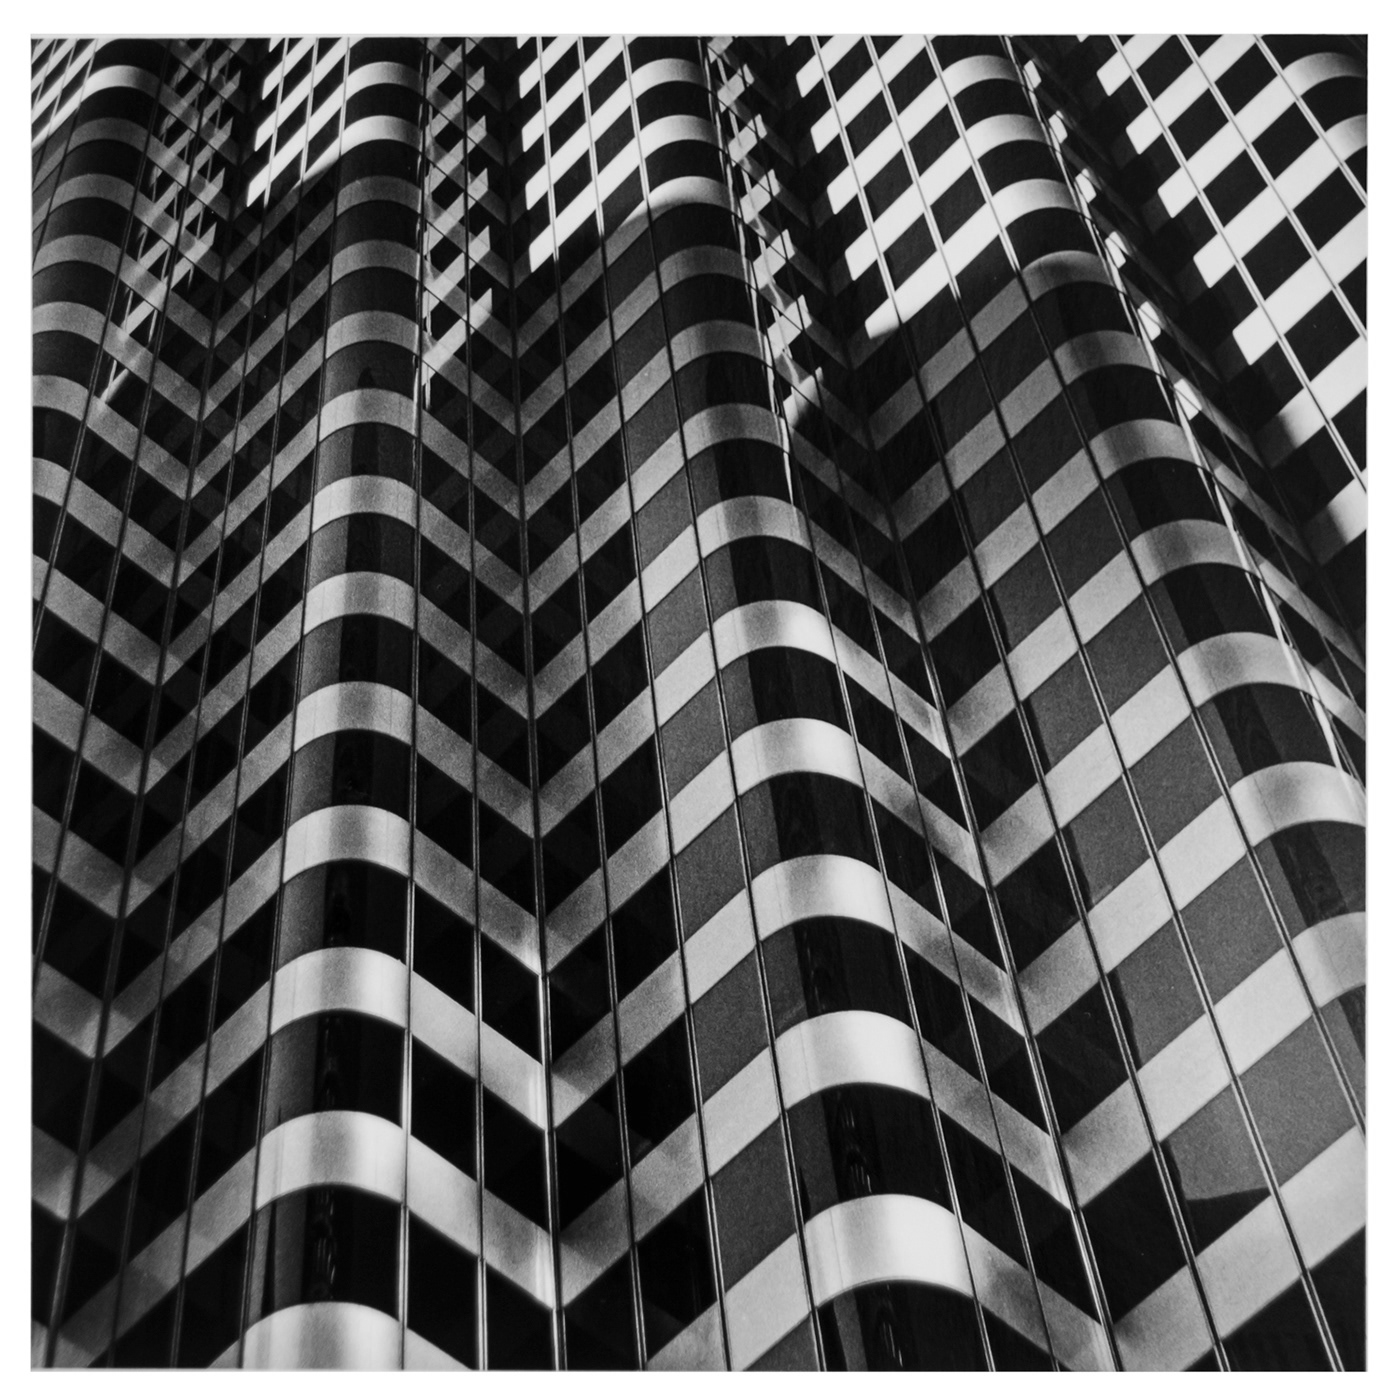 35mm analog architecture black and white Film   geometric monochrome pattern Photography  street photography